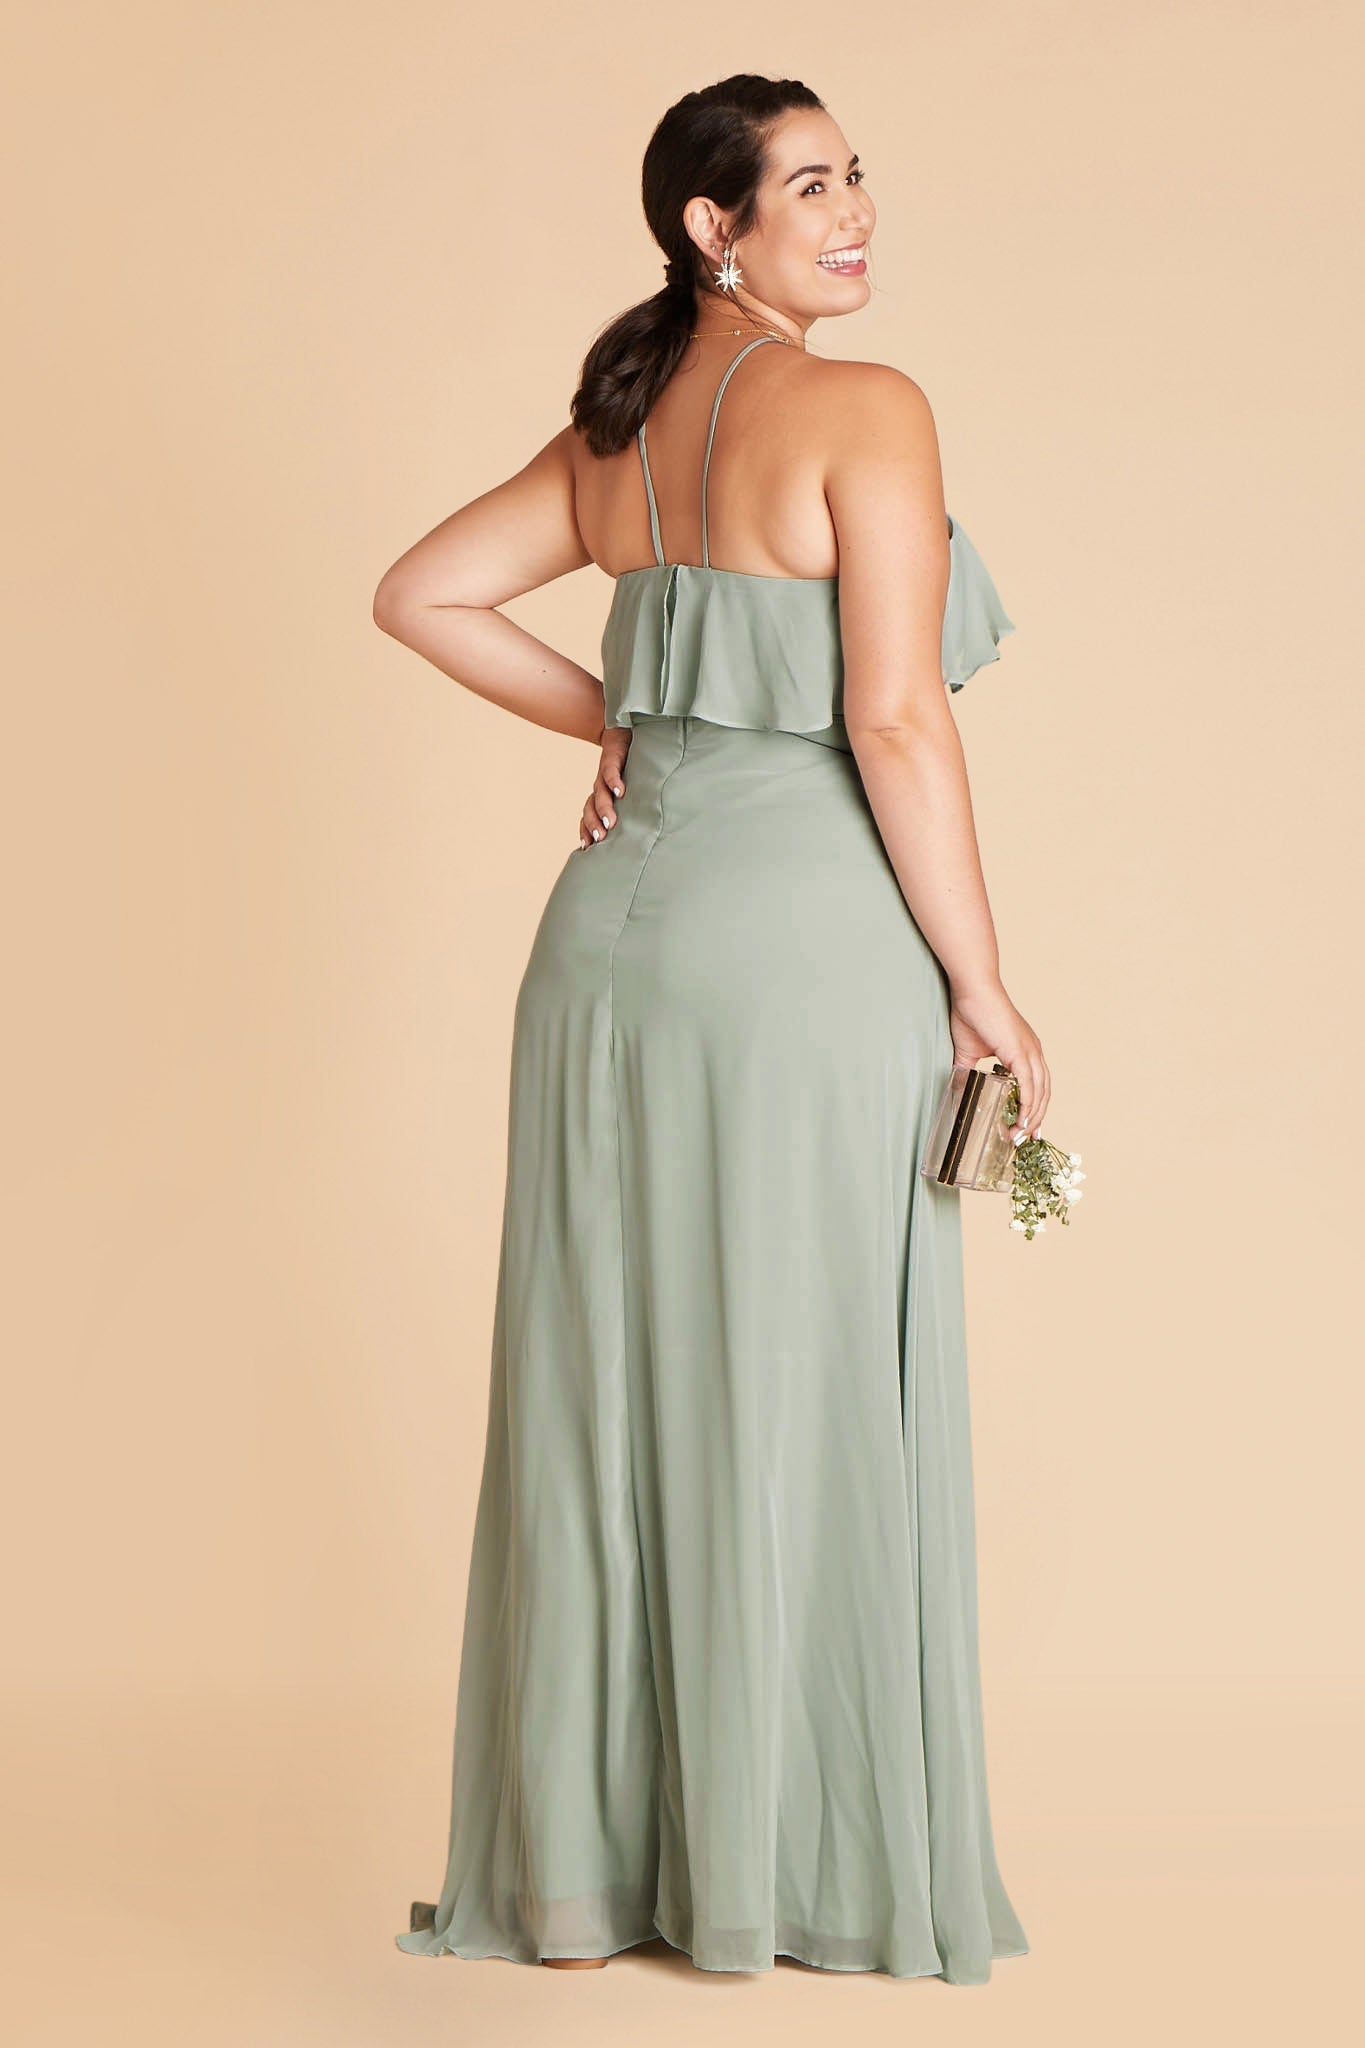 Jules plus size bridesmaid dress in sage green chiffon by Birdy Grey, side view